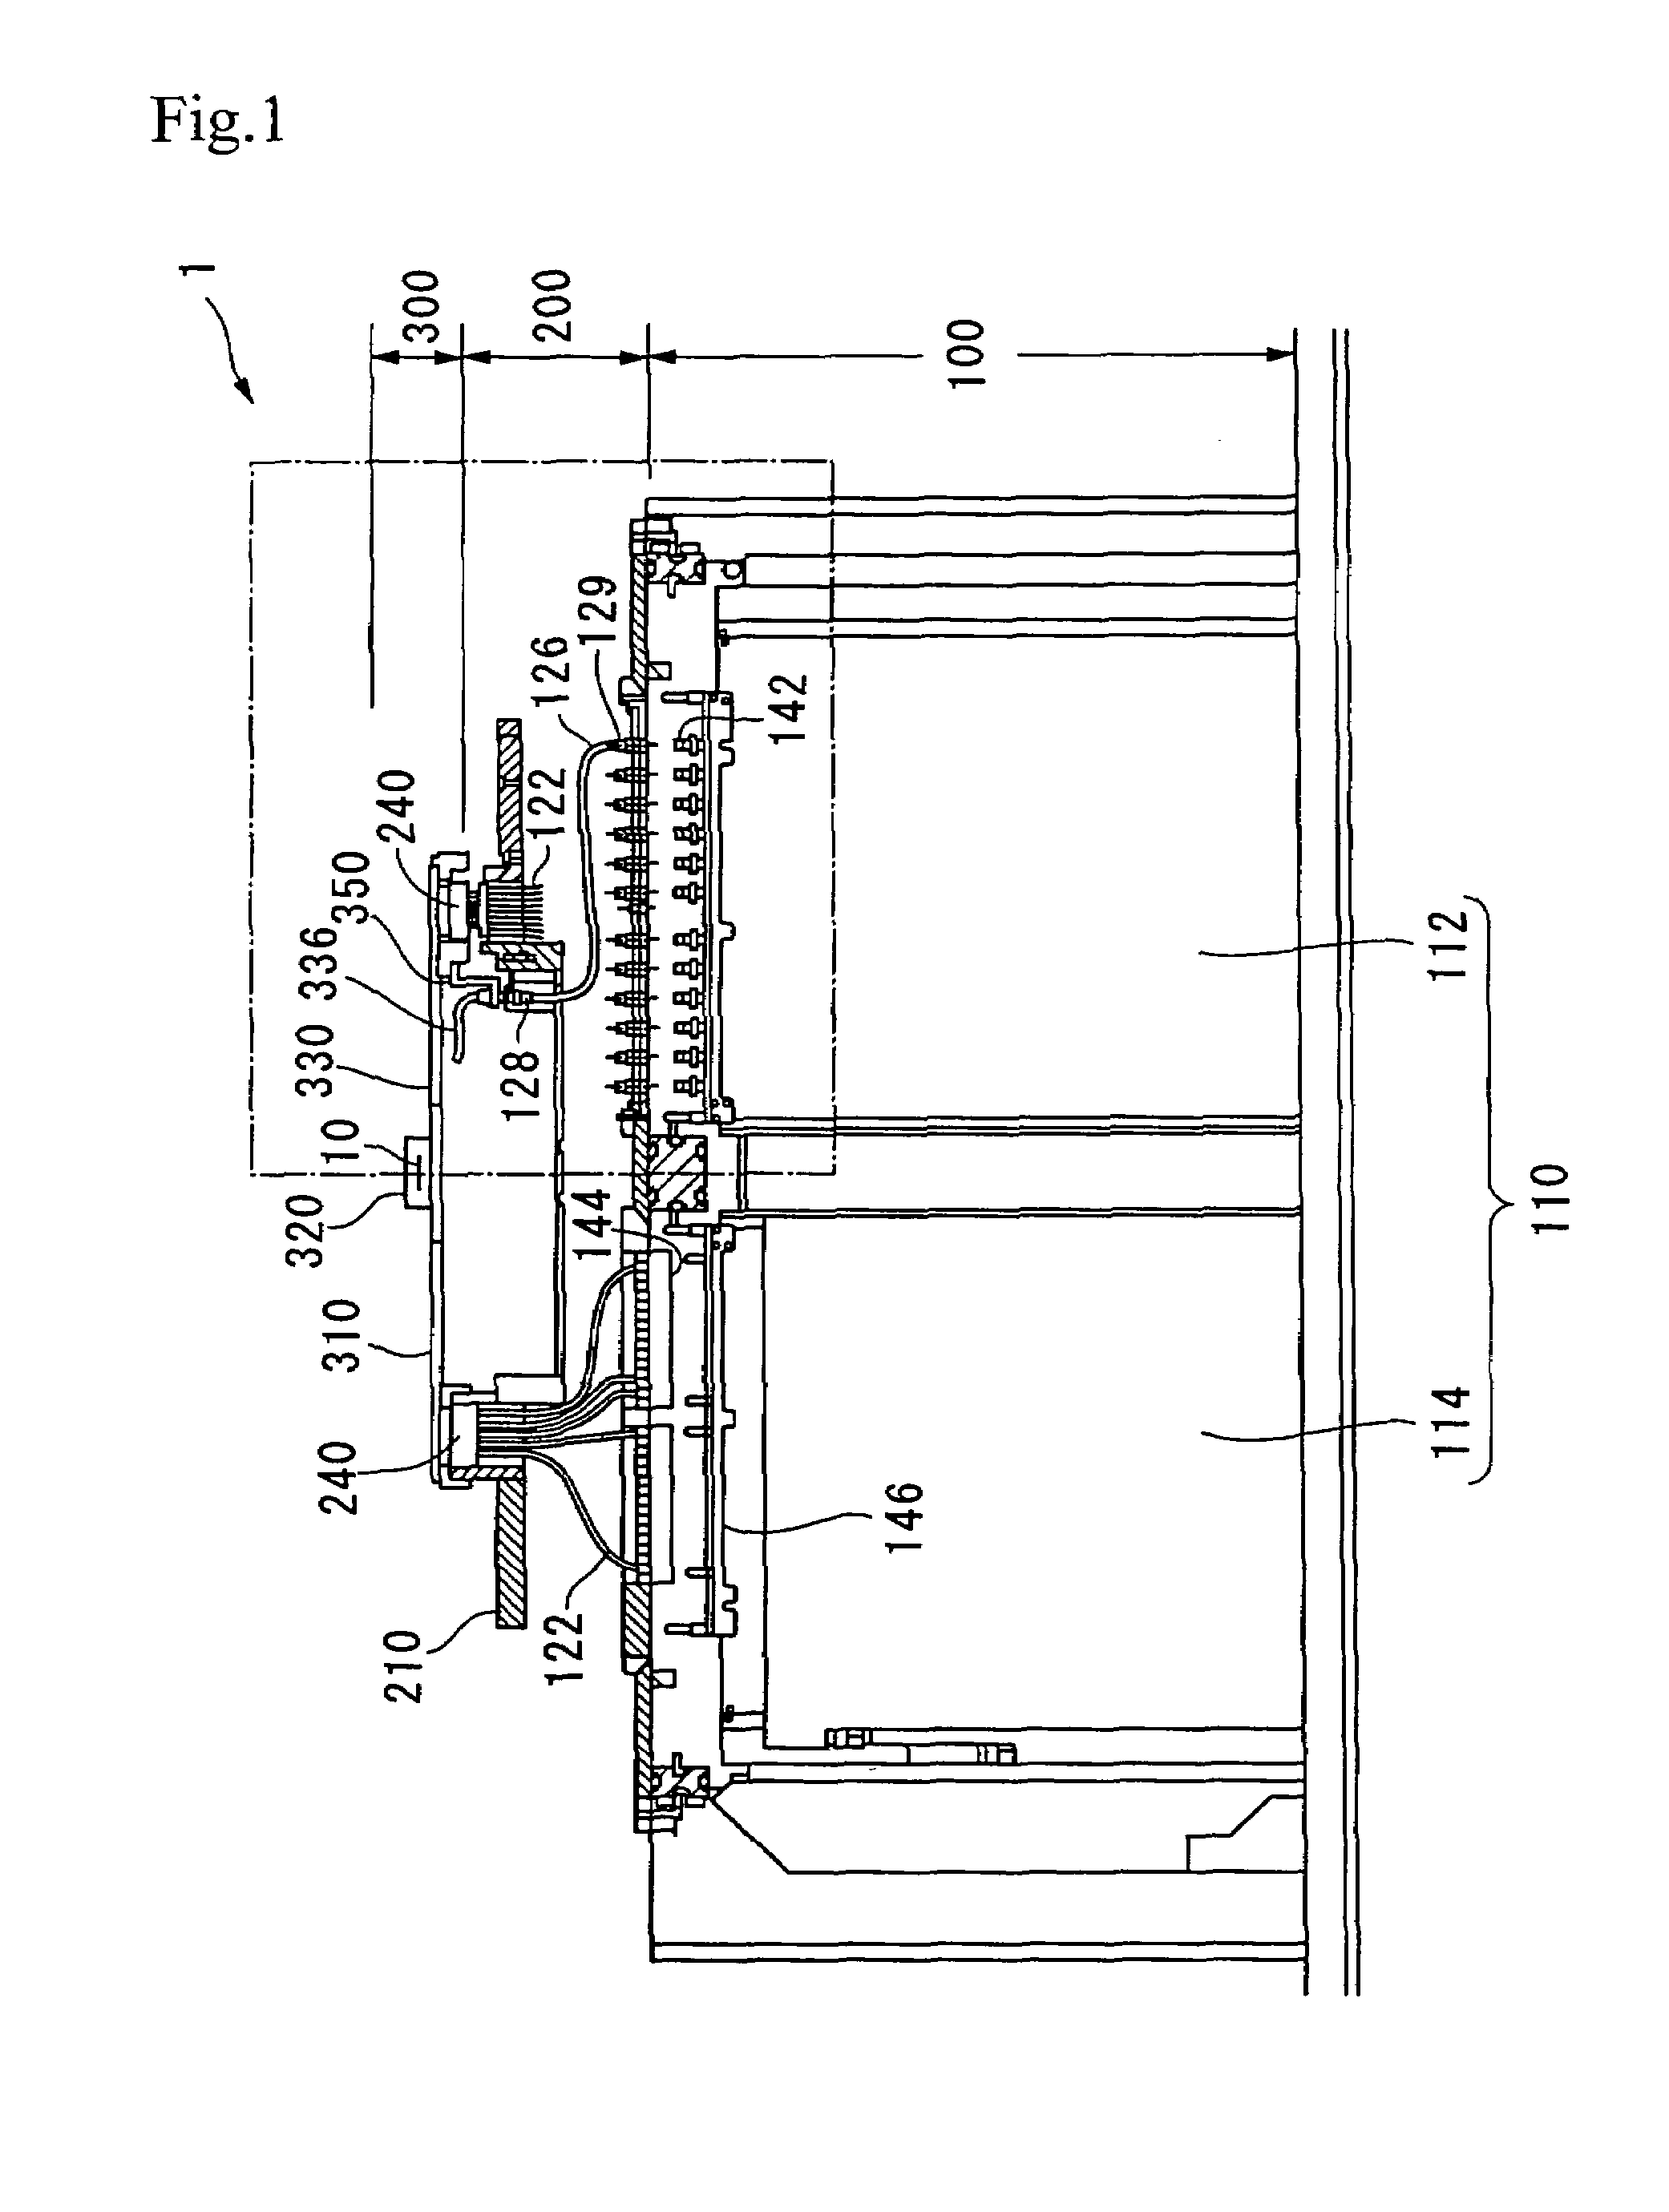 Connector housing block, interface member and electronic device testing apparatus